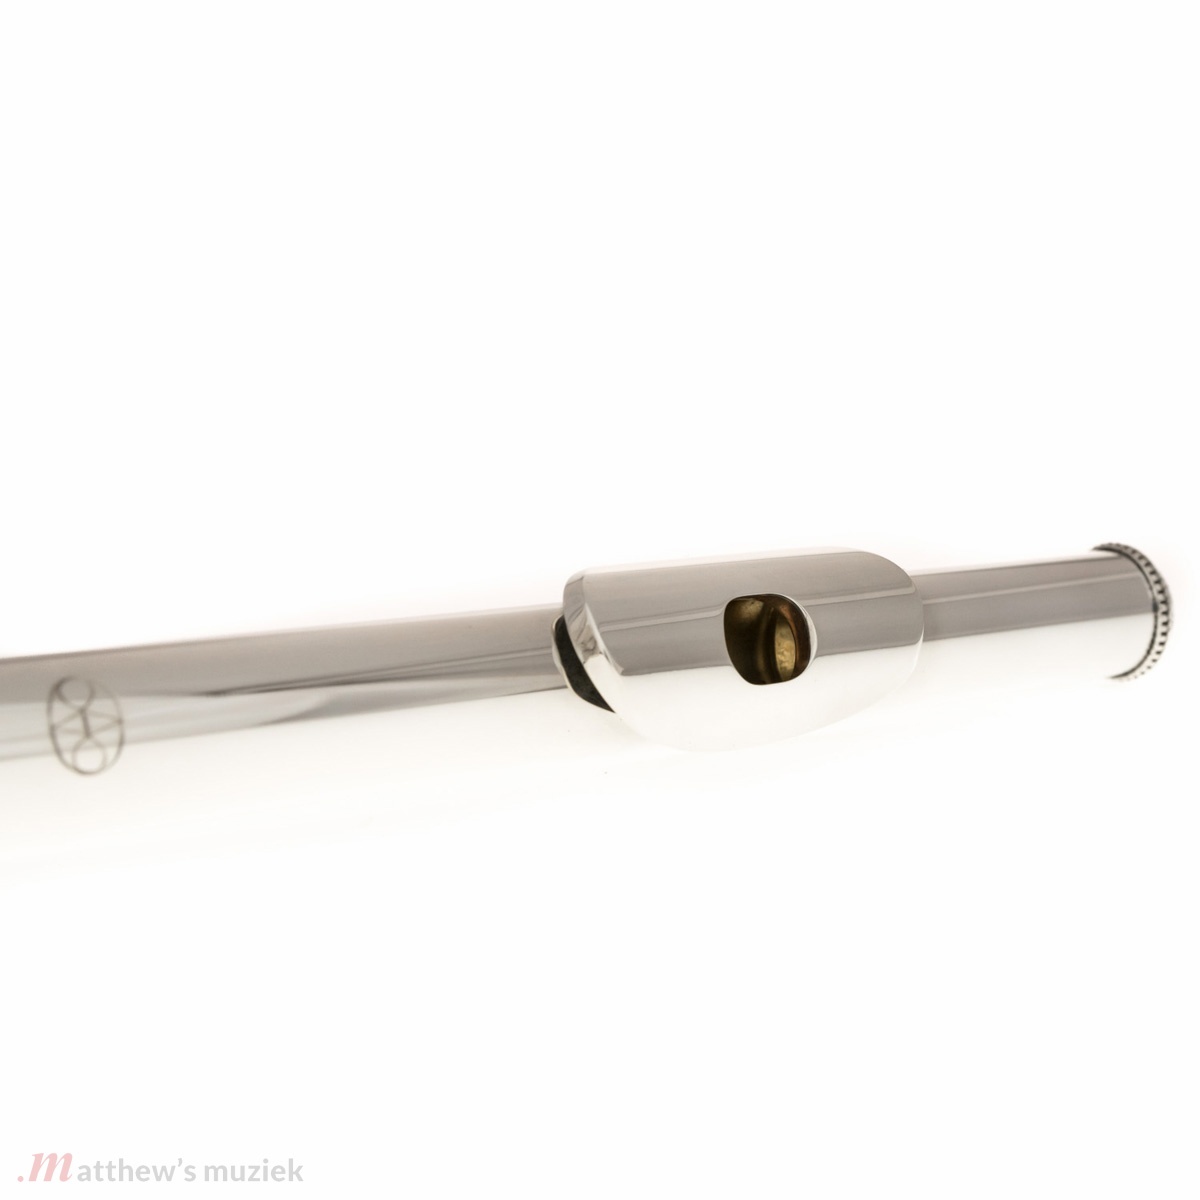 Anton Vroom Flute Headjoint - Sterling Silver with 9k Gold Riser - Style 3